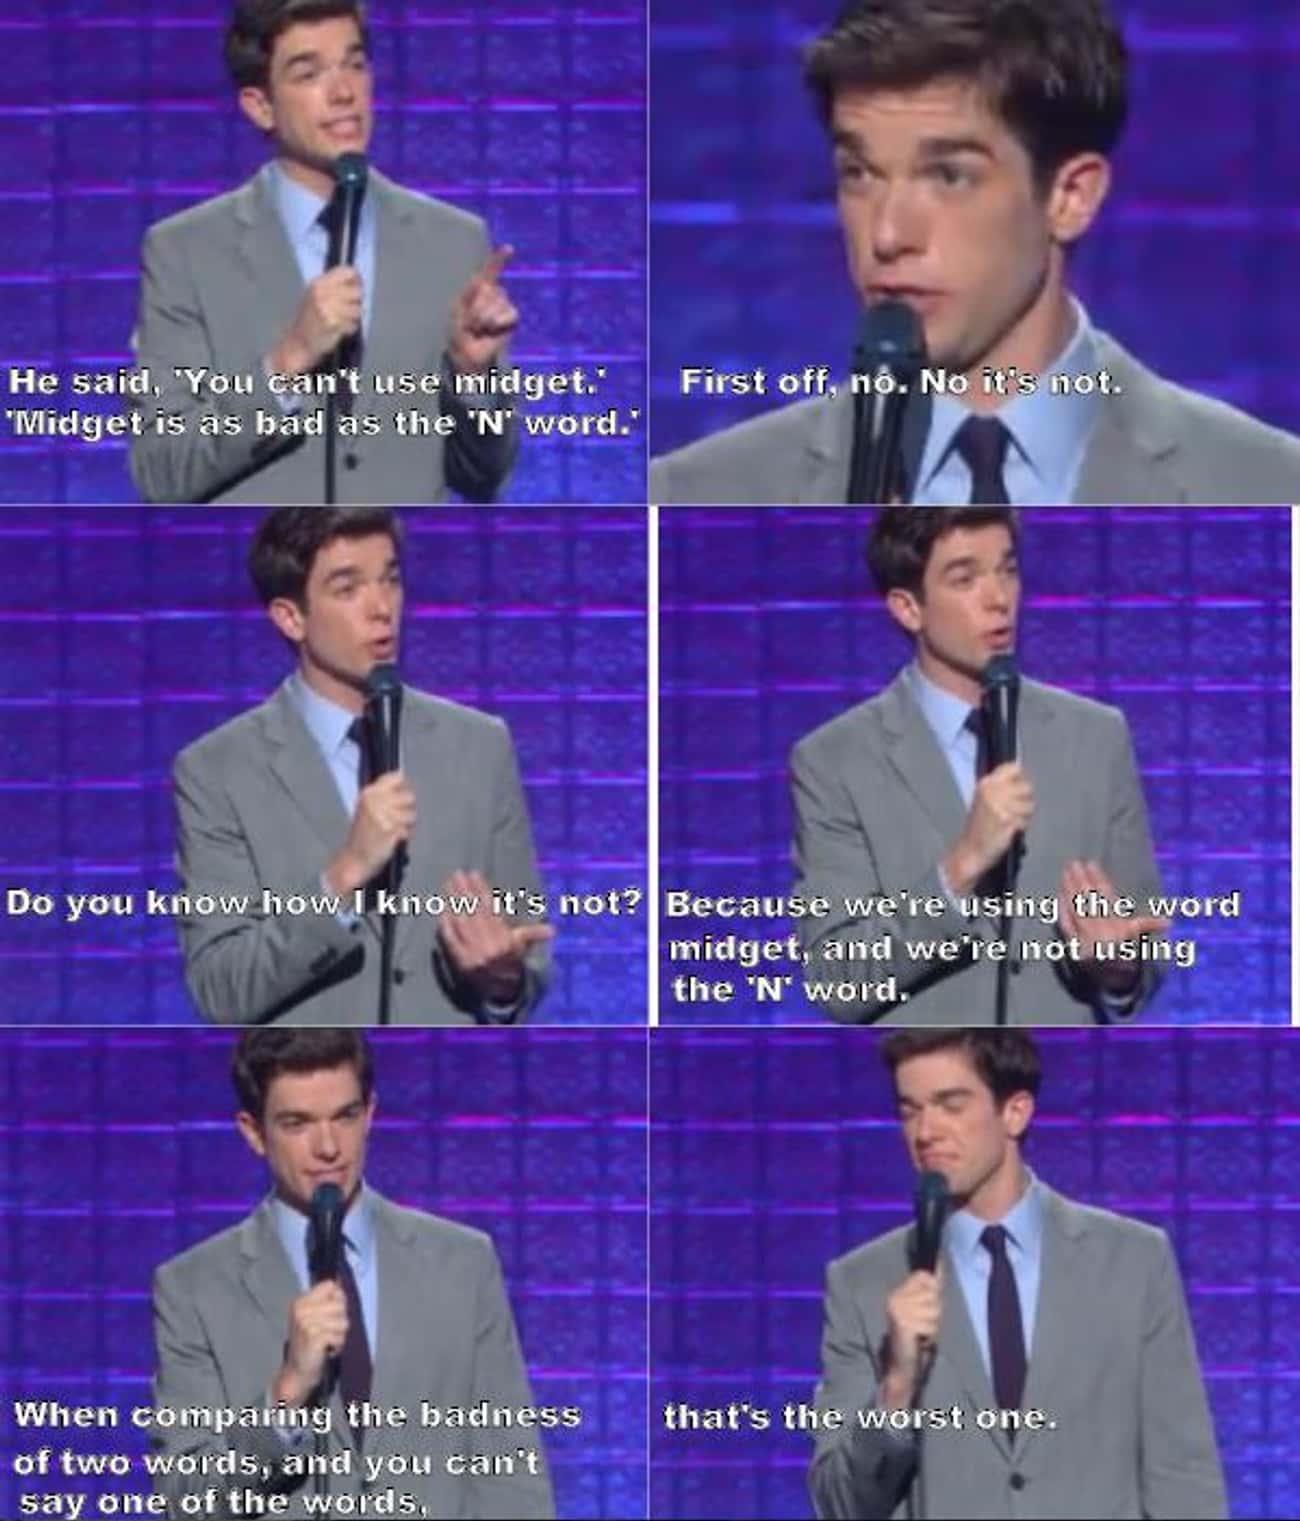 The Funniest John Mulaney Quotes And Jokes, Ranked